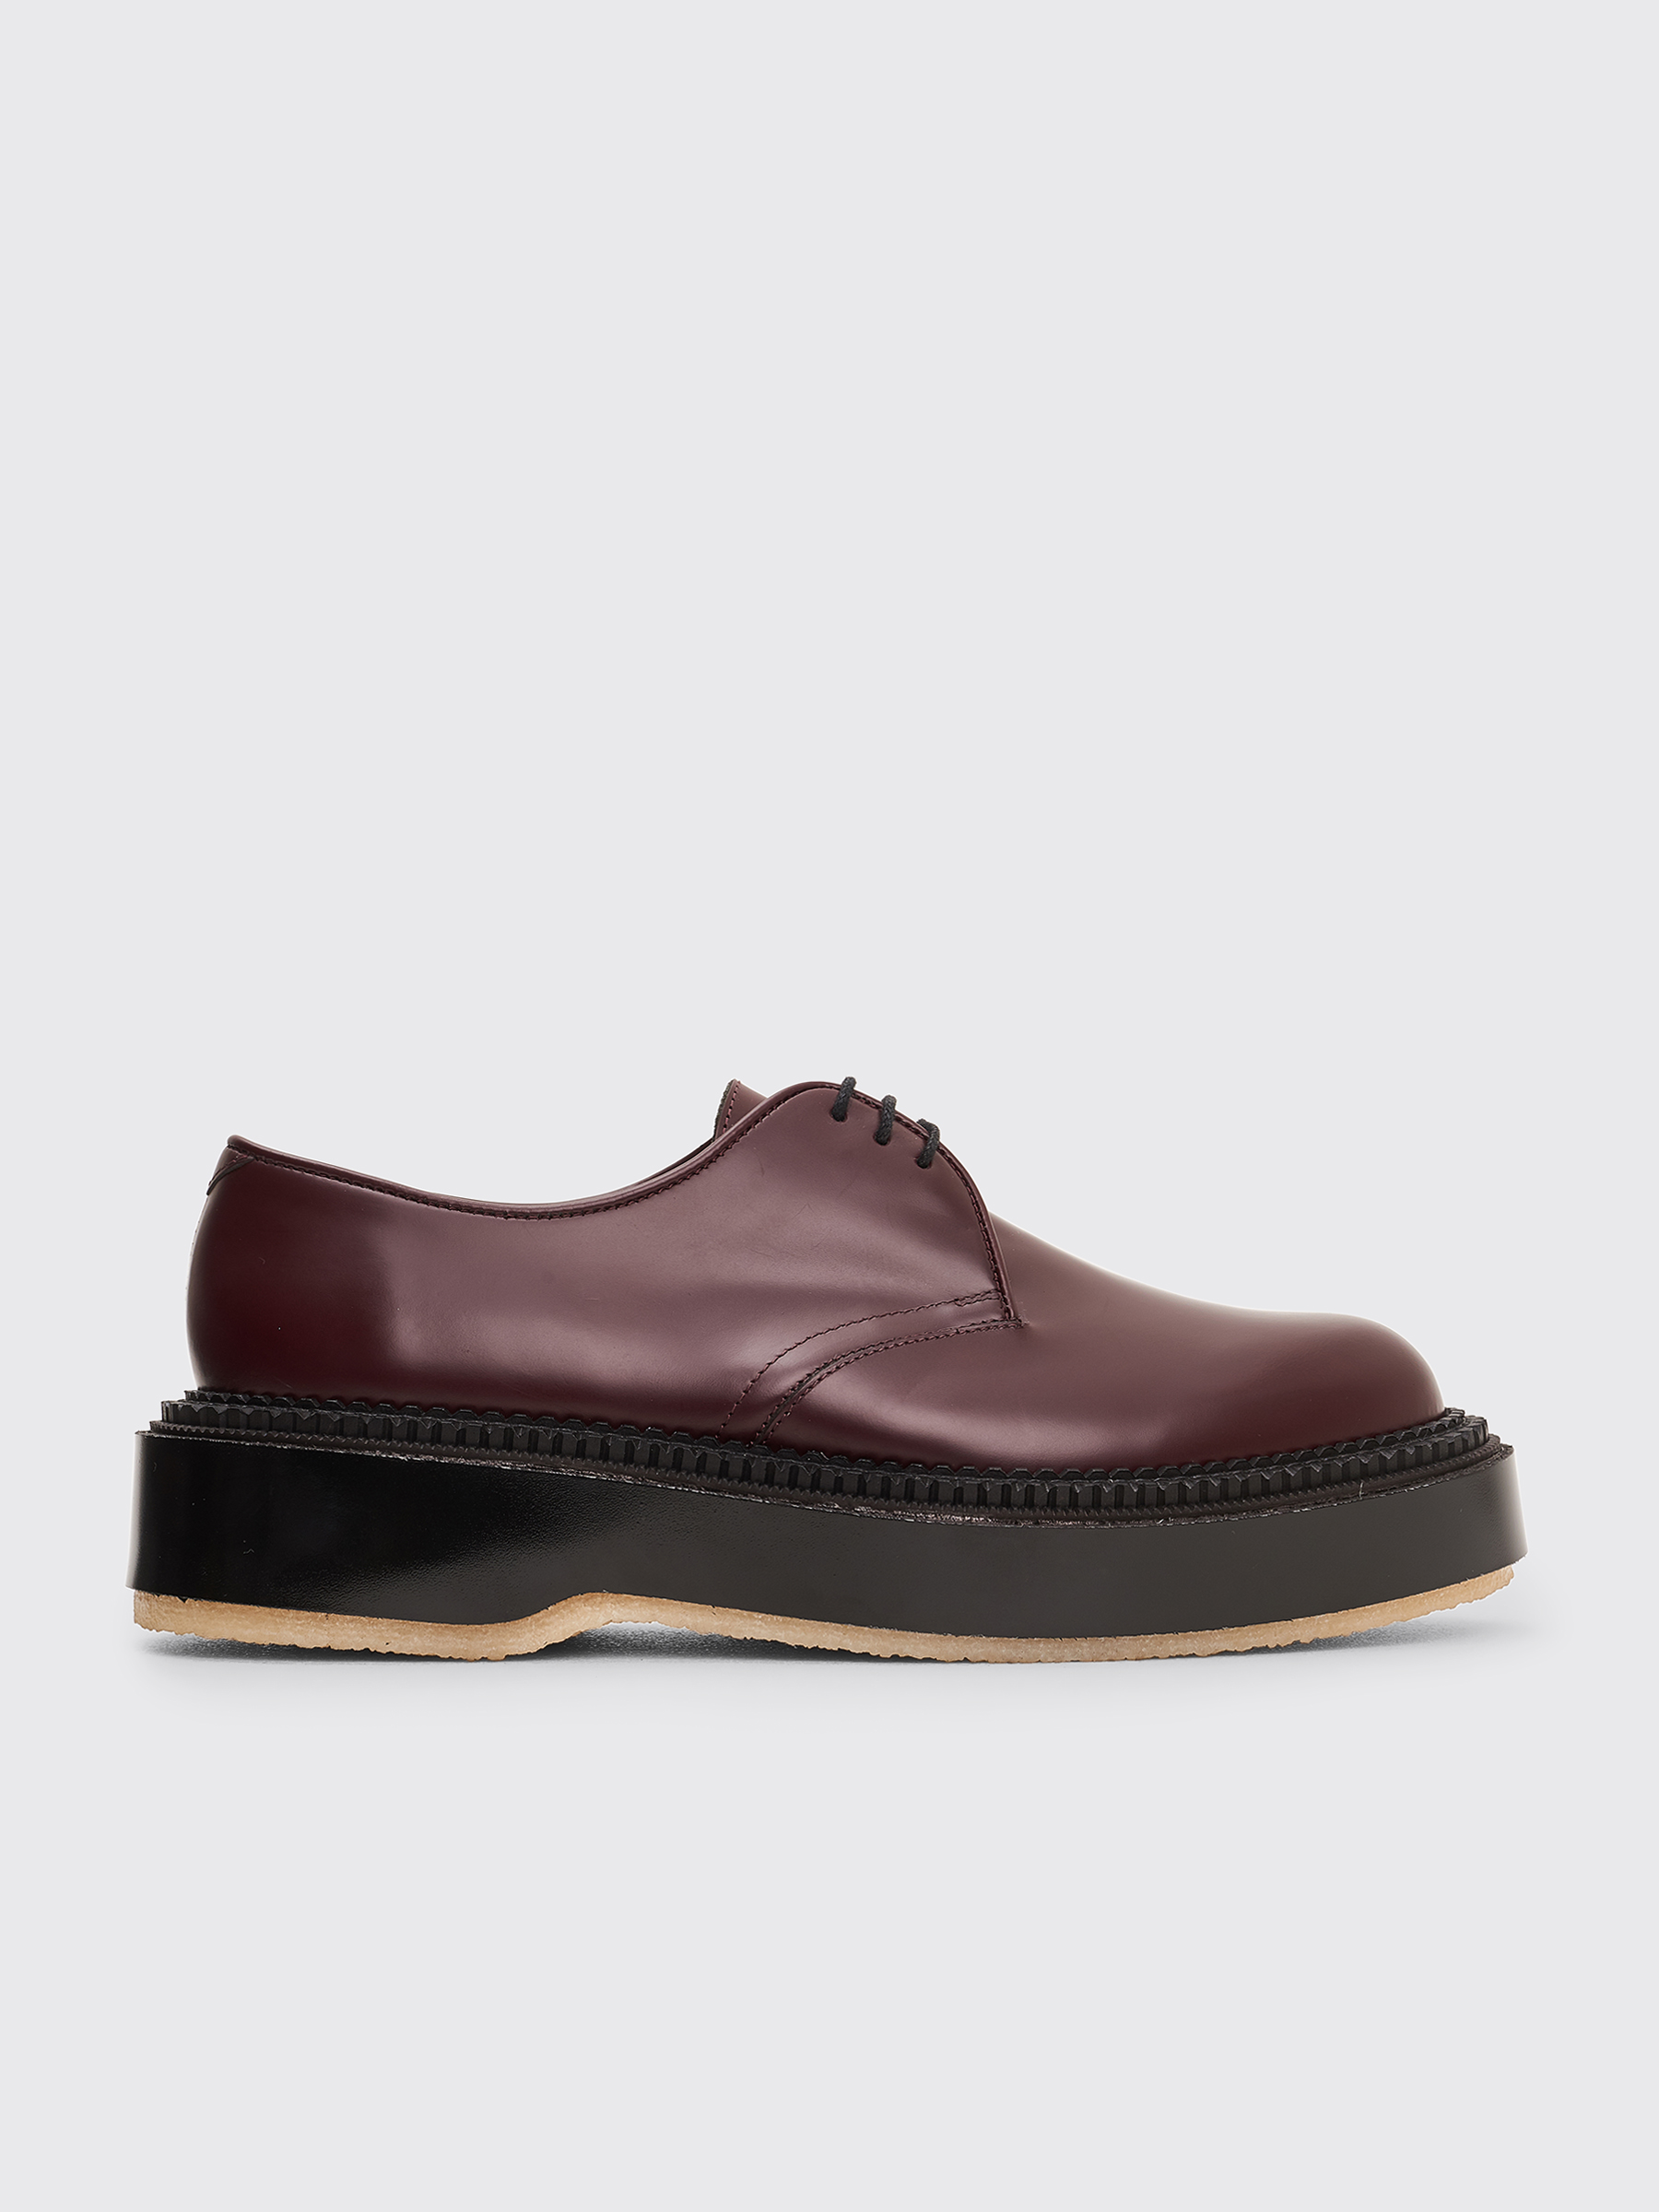 Adieu x Undercover Type 54C Polido Derby Shoes Prune